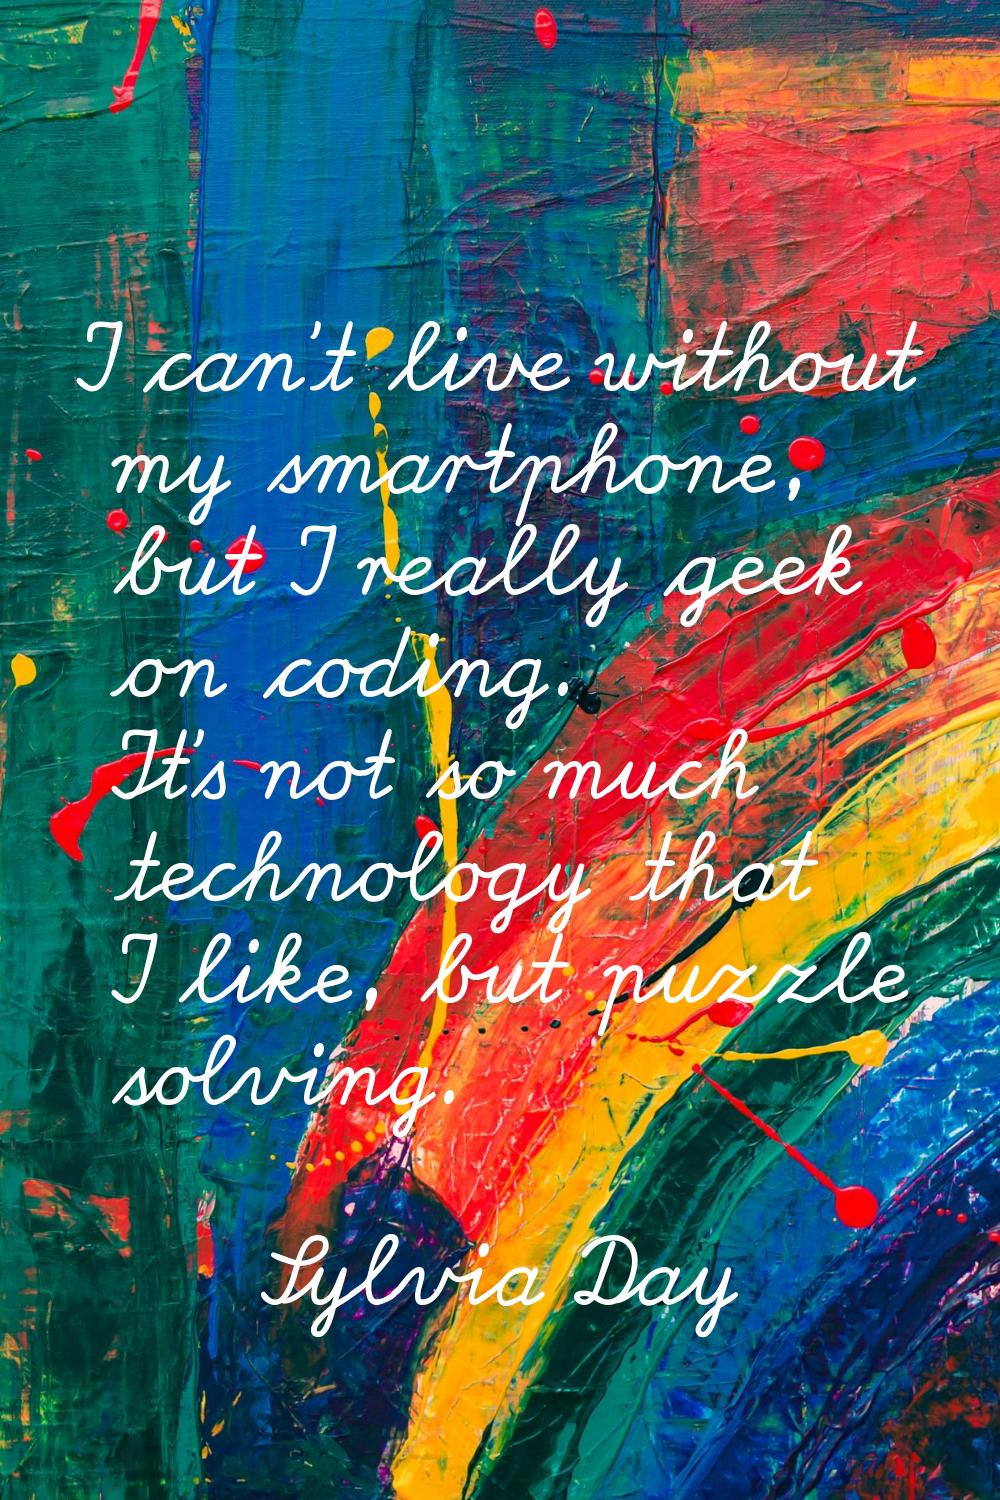 I can't live without my smartphone, but I really geek on coding. It's not so much technology that I